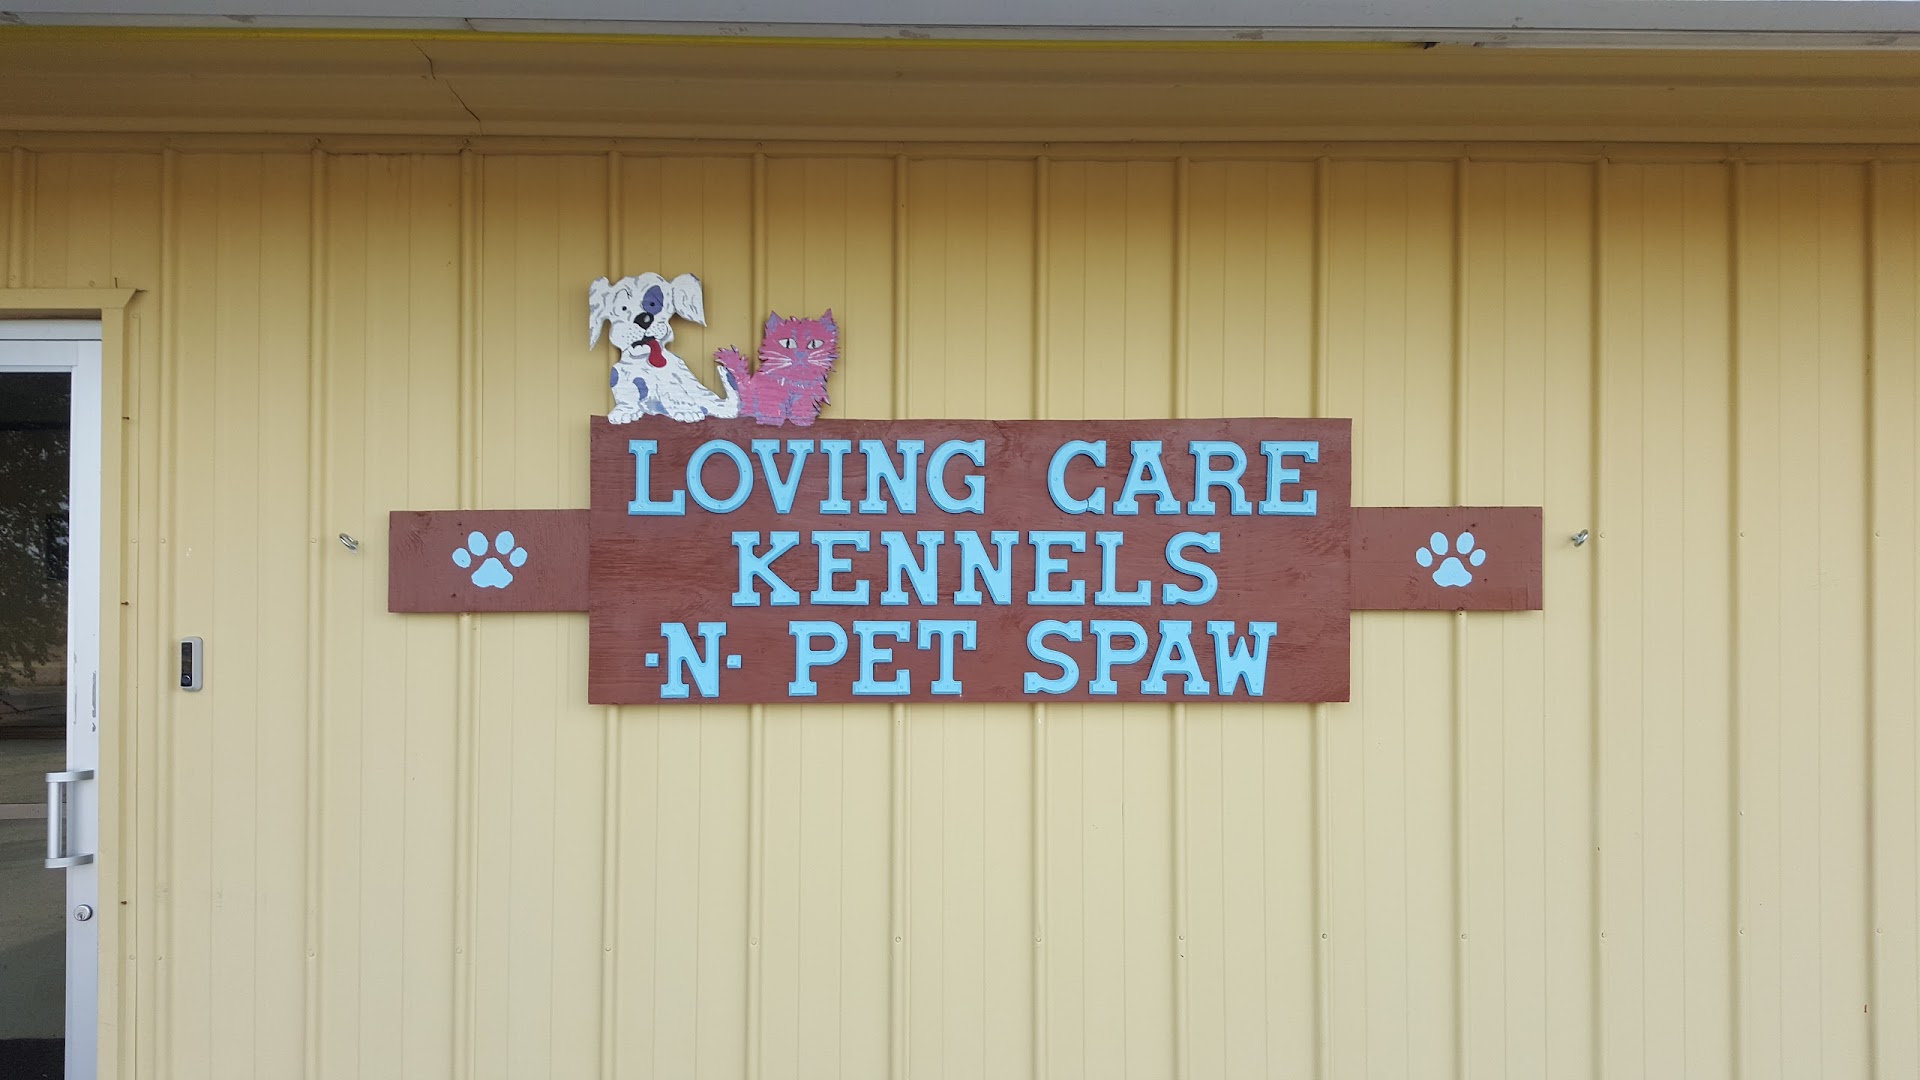 LOVING CARE KENNELS AND PET SPAW